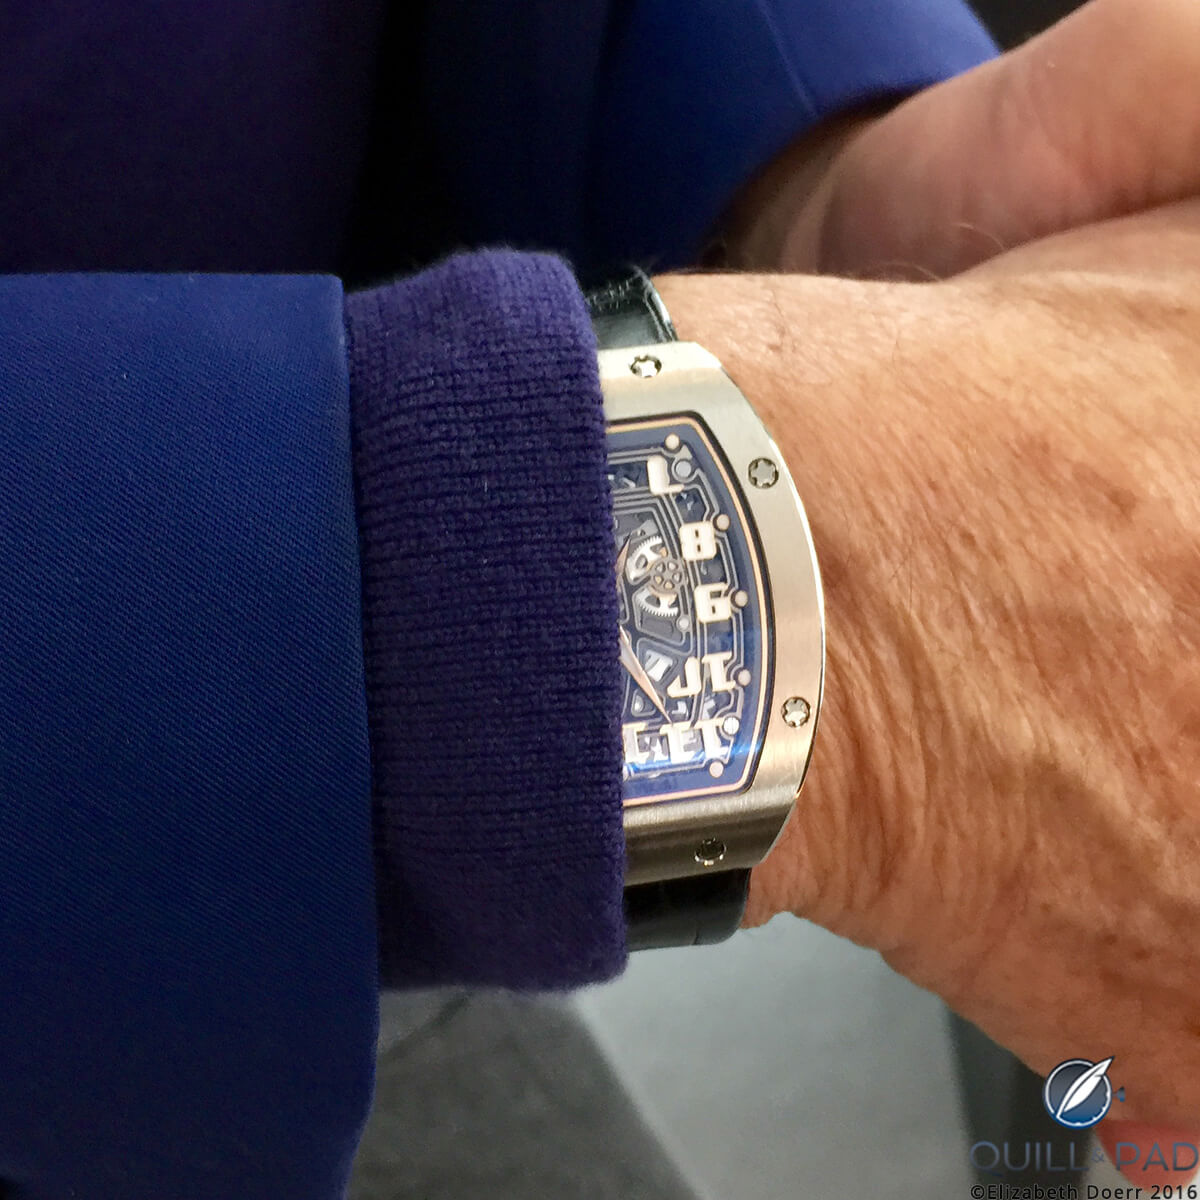 RM 67-01 on the wrist of Richard Mille at the opening of his eponymous boutique in Munich